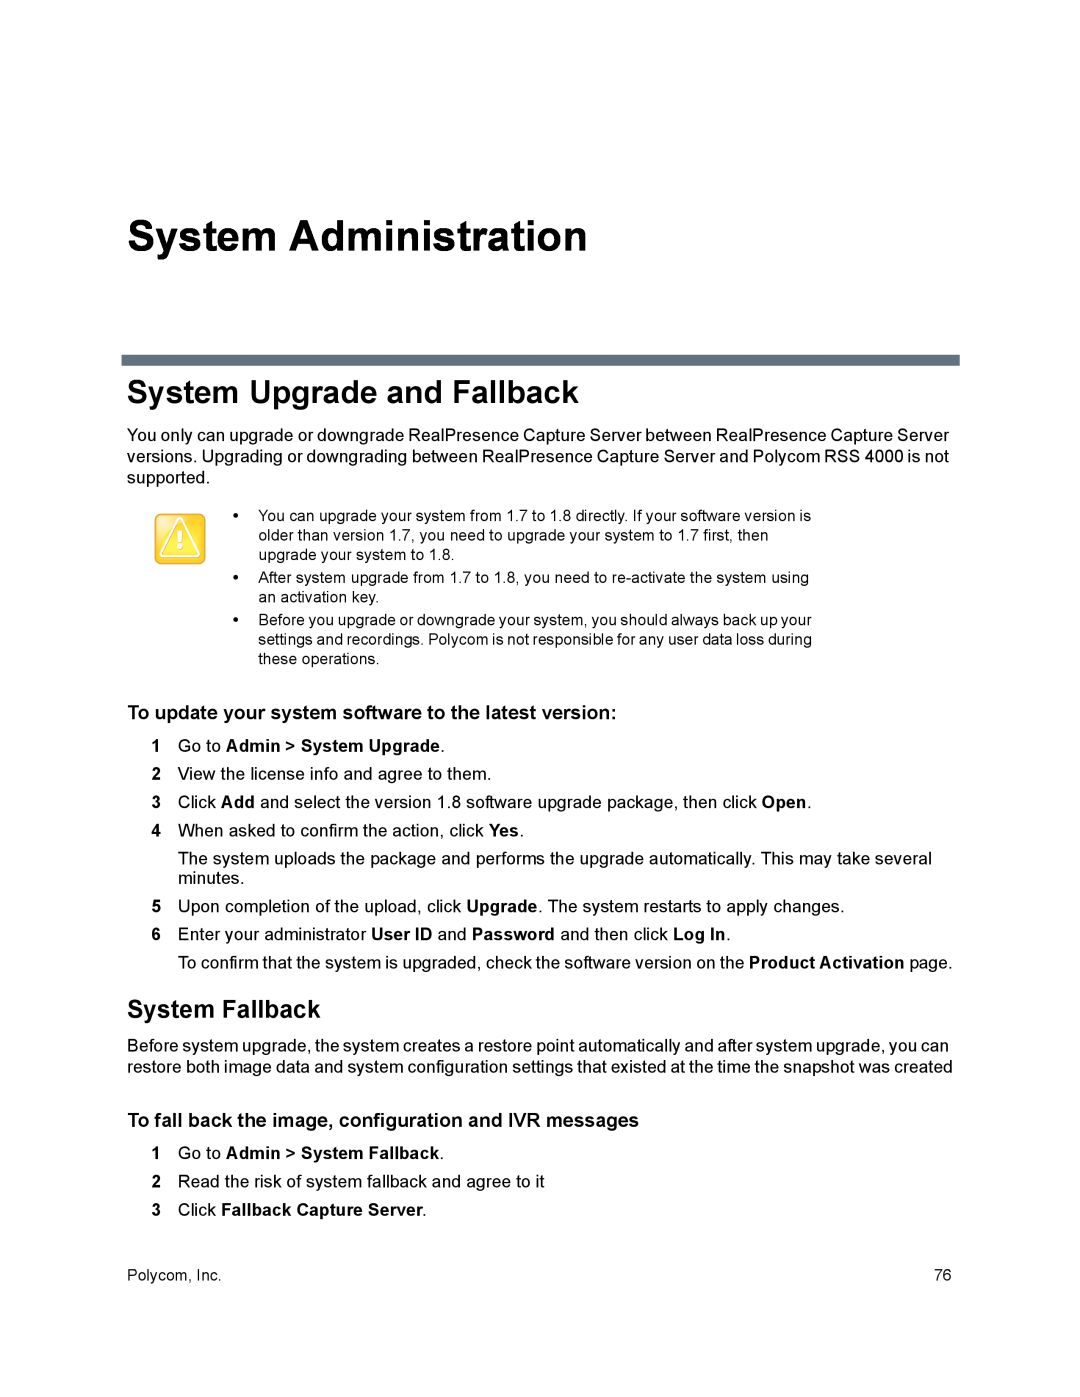 Polycom 40/0 manual System Administration, System Upgrade and Fallback, System Fallback, Go to Admin System Upgrade 